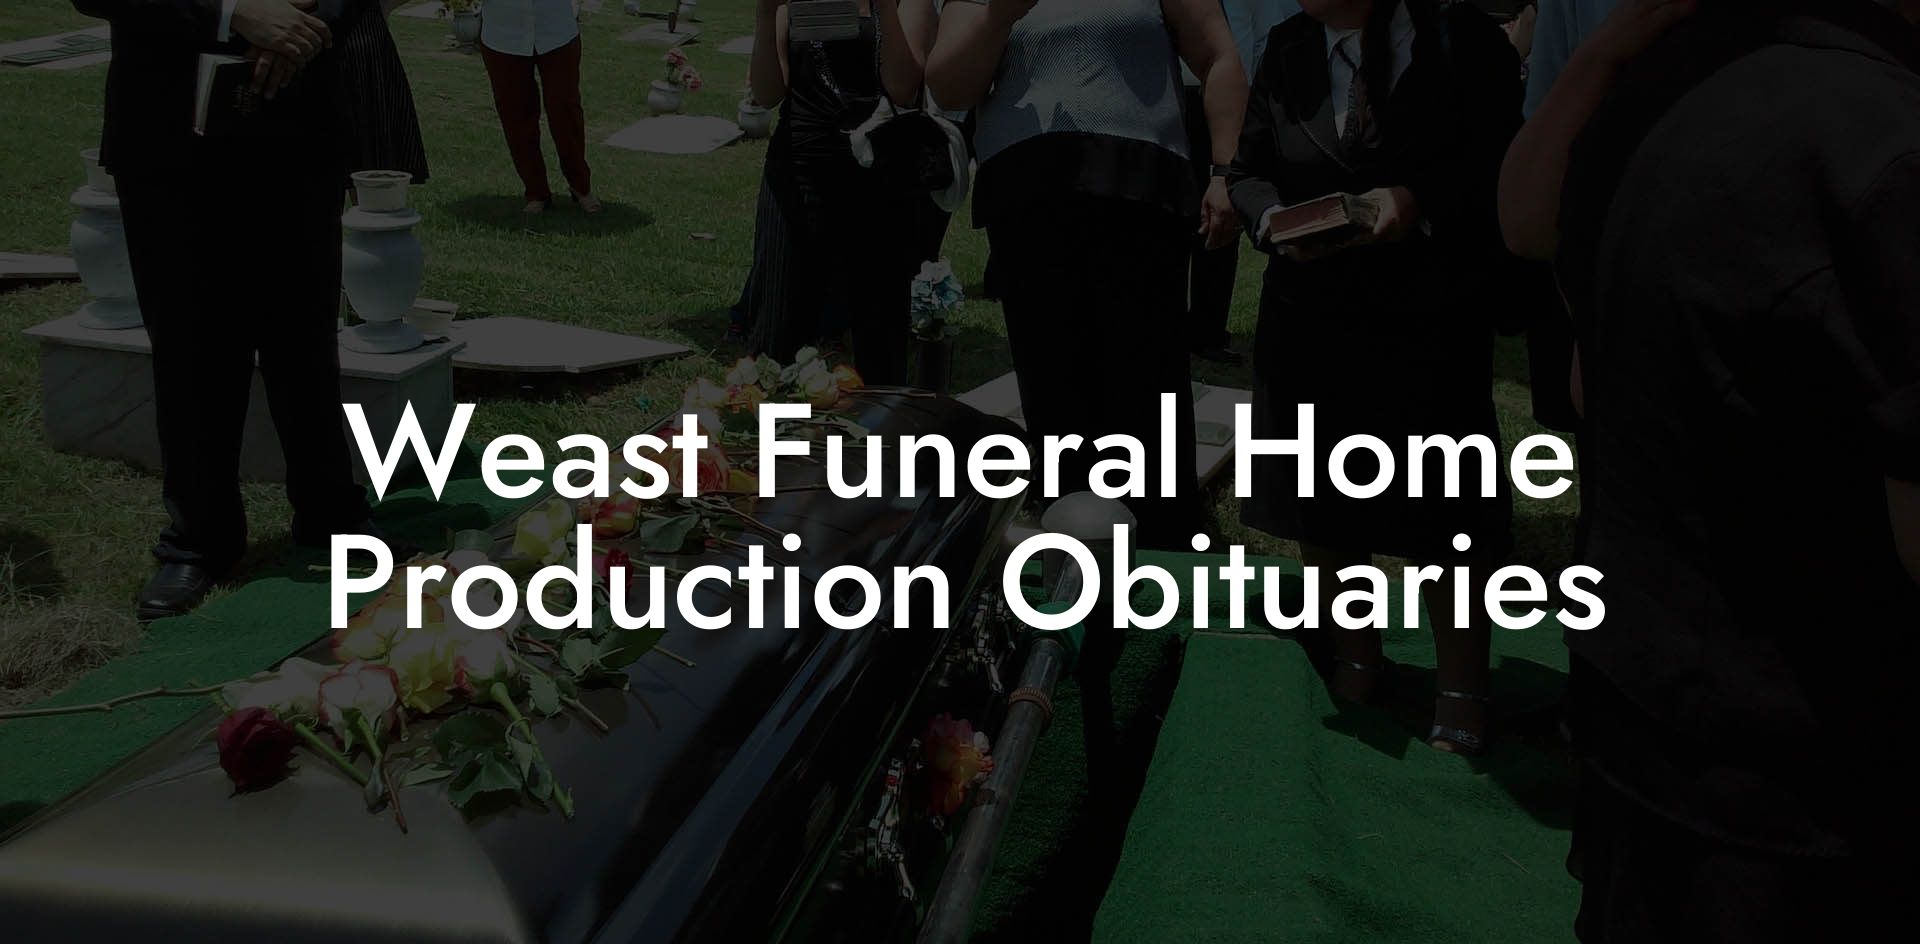 Weast Funeral Home Production Obituaries